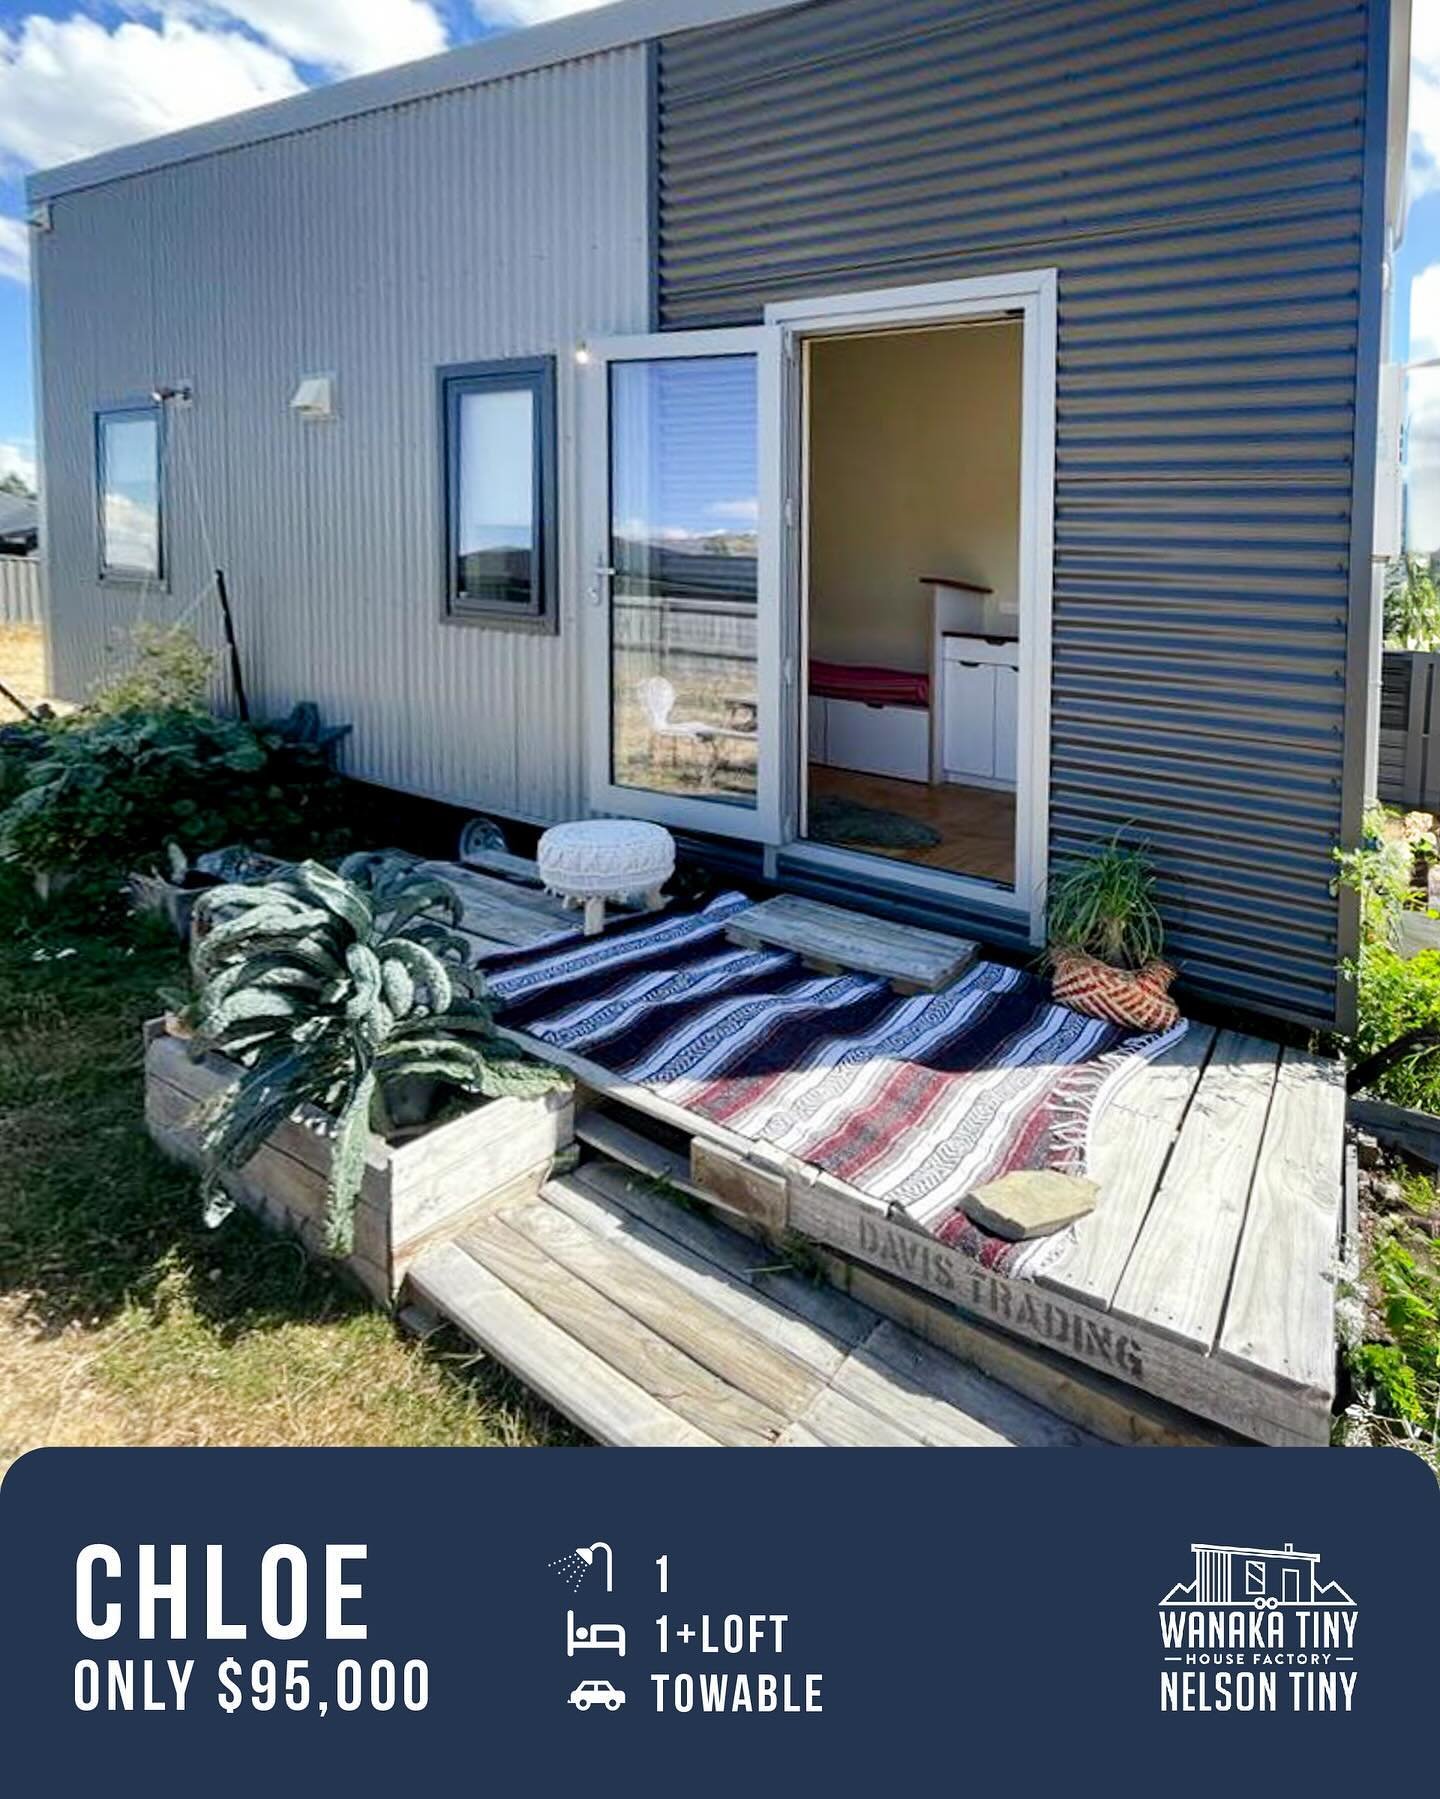 Near new Cosy towable Tiny home for sale for only $95,000

A quality Wanaka Tiny House Factory construction, completed in July 2022. The house is optimized for space but light enough to legally tow on the road when empty. Features bespoke cabinetry, 